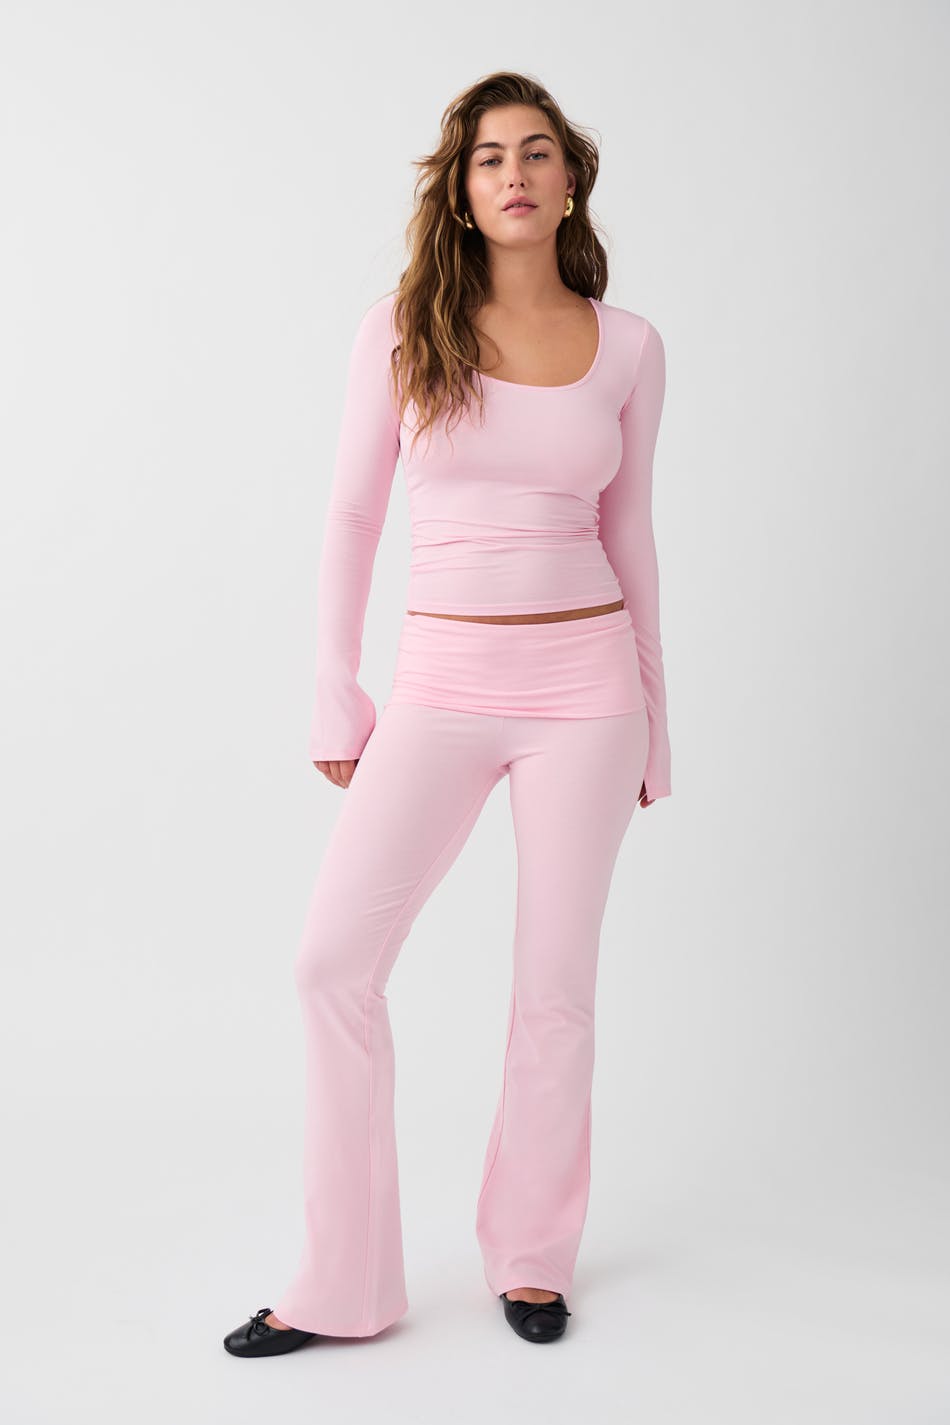 Gina Tricot - Soft touch folded flare trousers - yoga-pants - Pink - XXS - Female